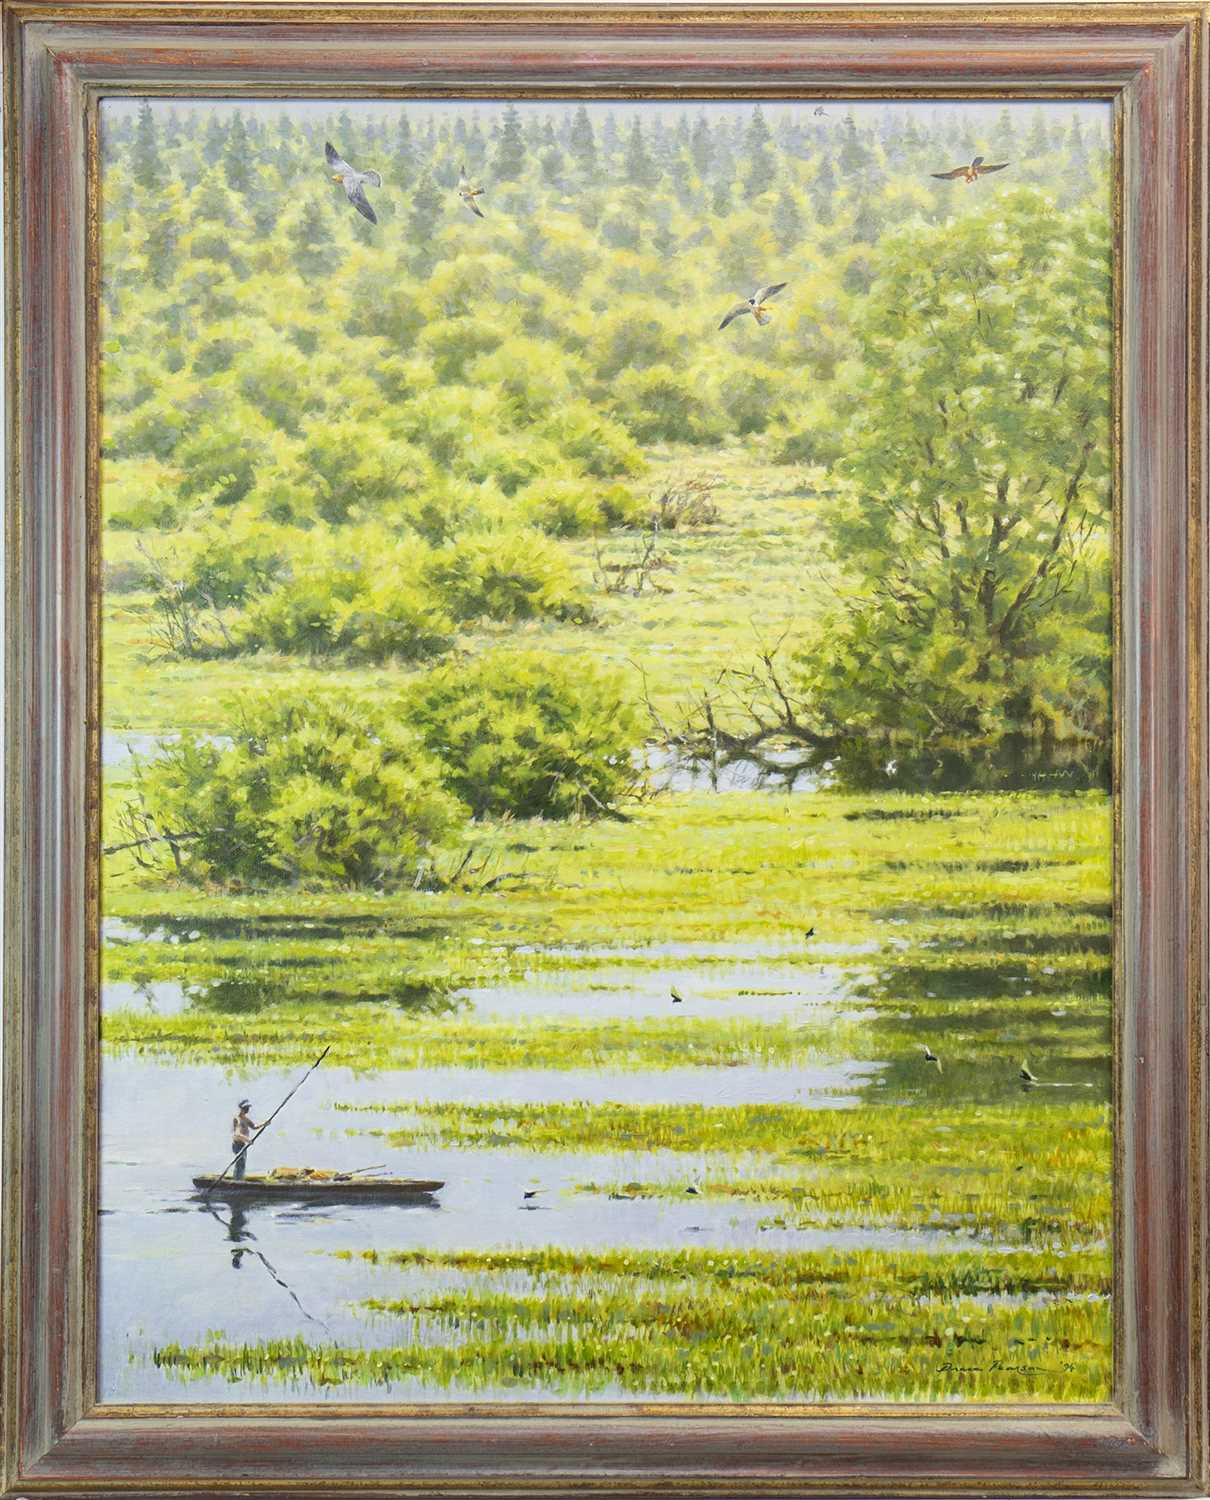 Lot 560 - THE BIEBRZA MARSHES, AN OIL BY BRUCE PEARSON